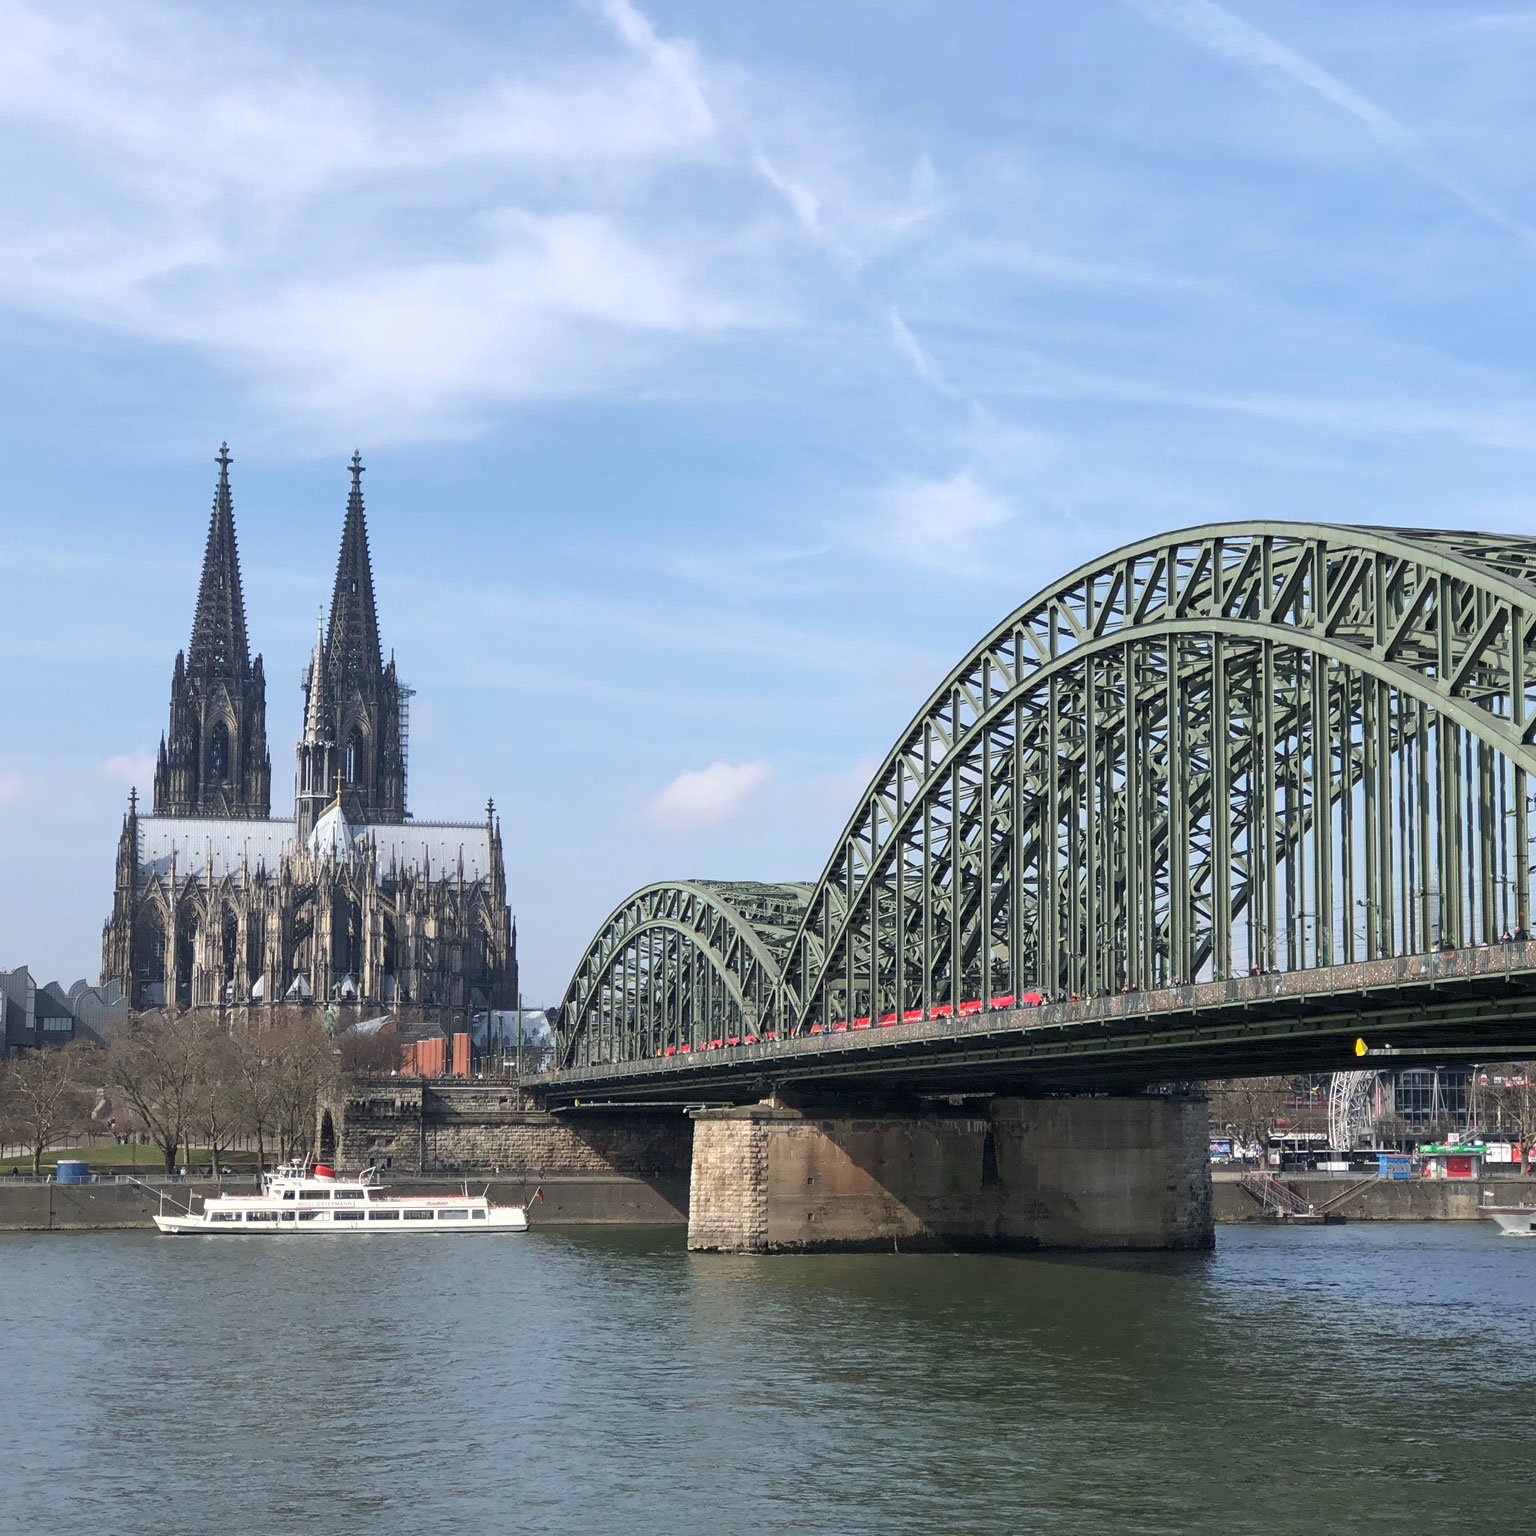 The City of Cologne